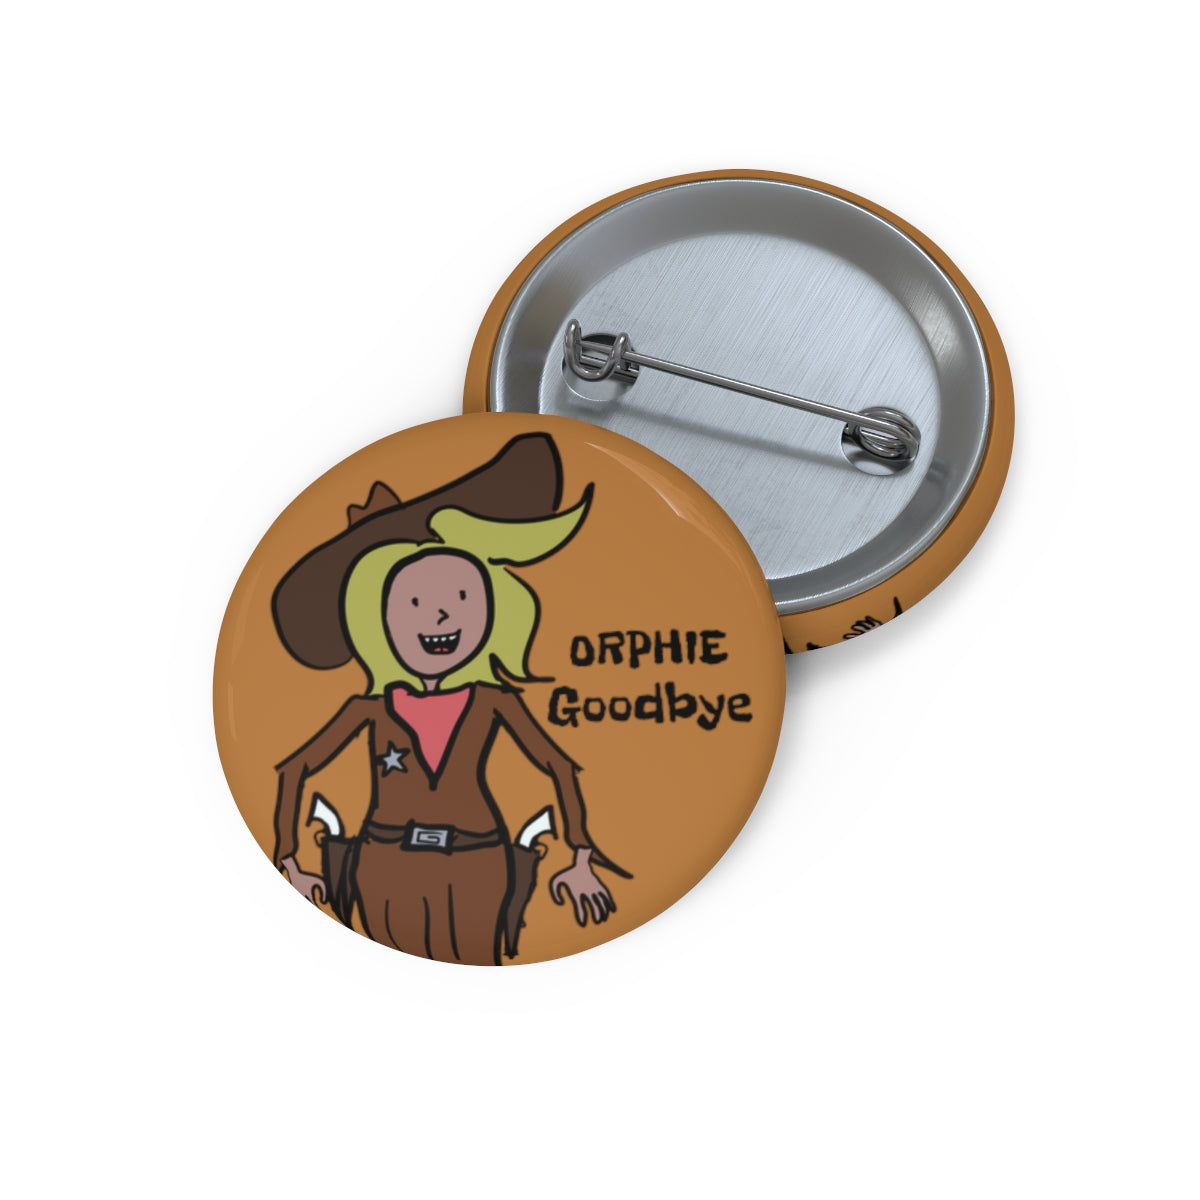 Orphie Goodbye - The Official Pin of The Goodbye Family